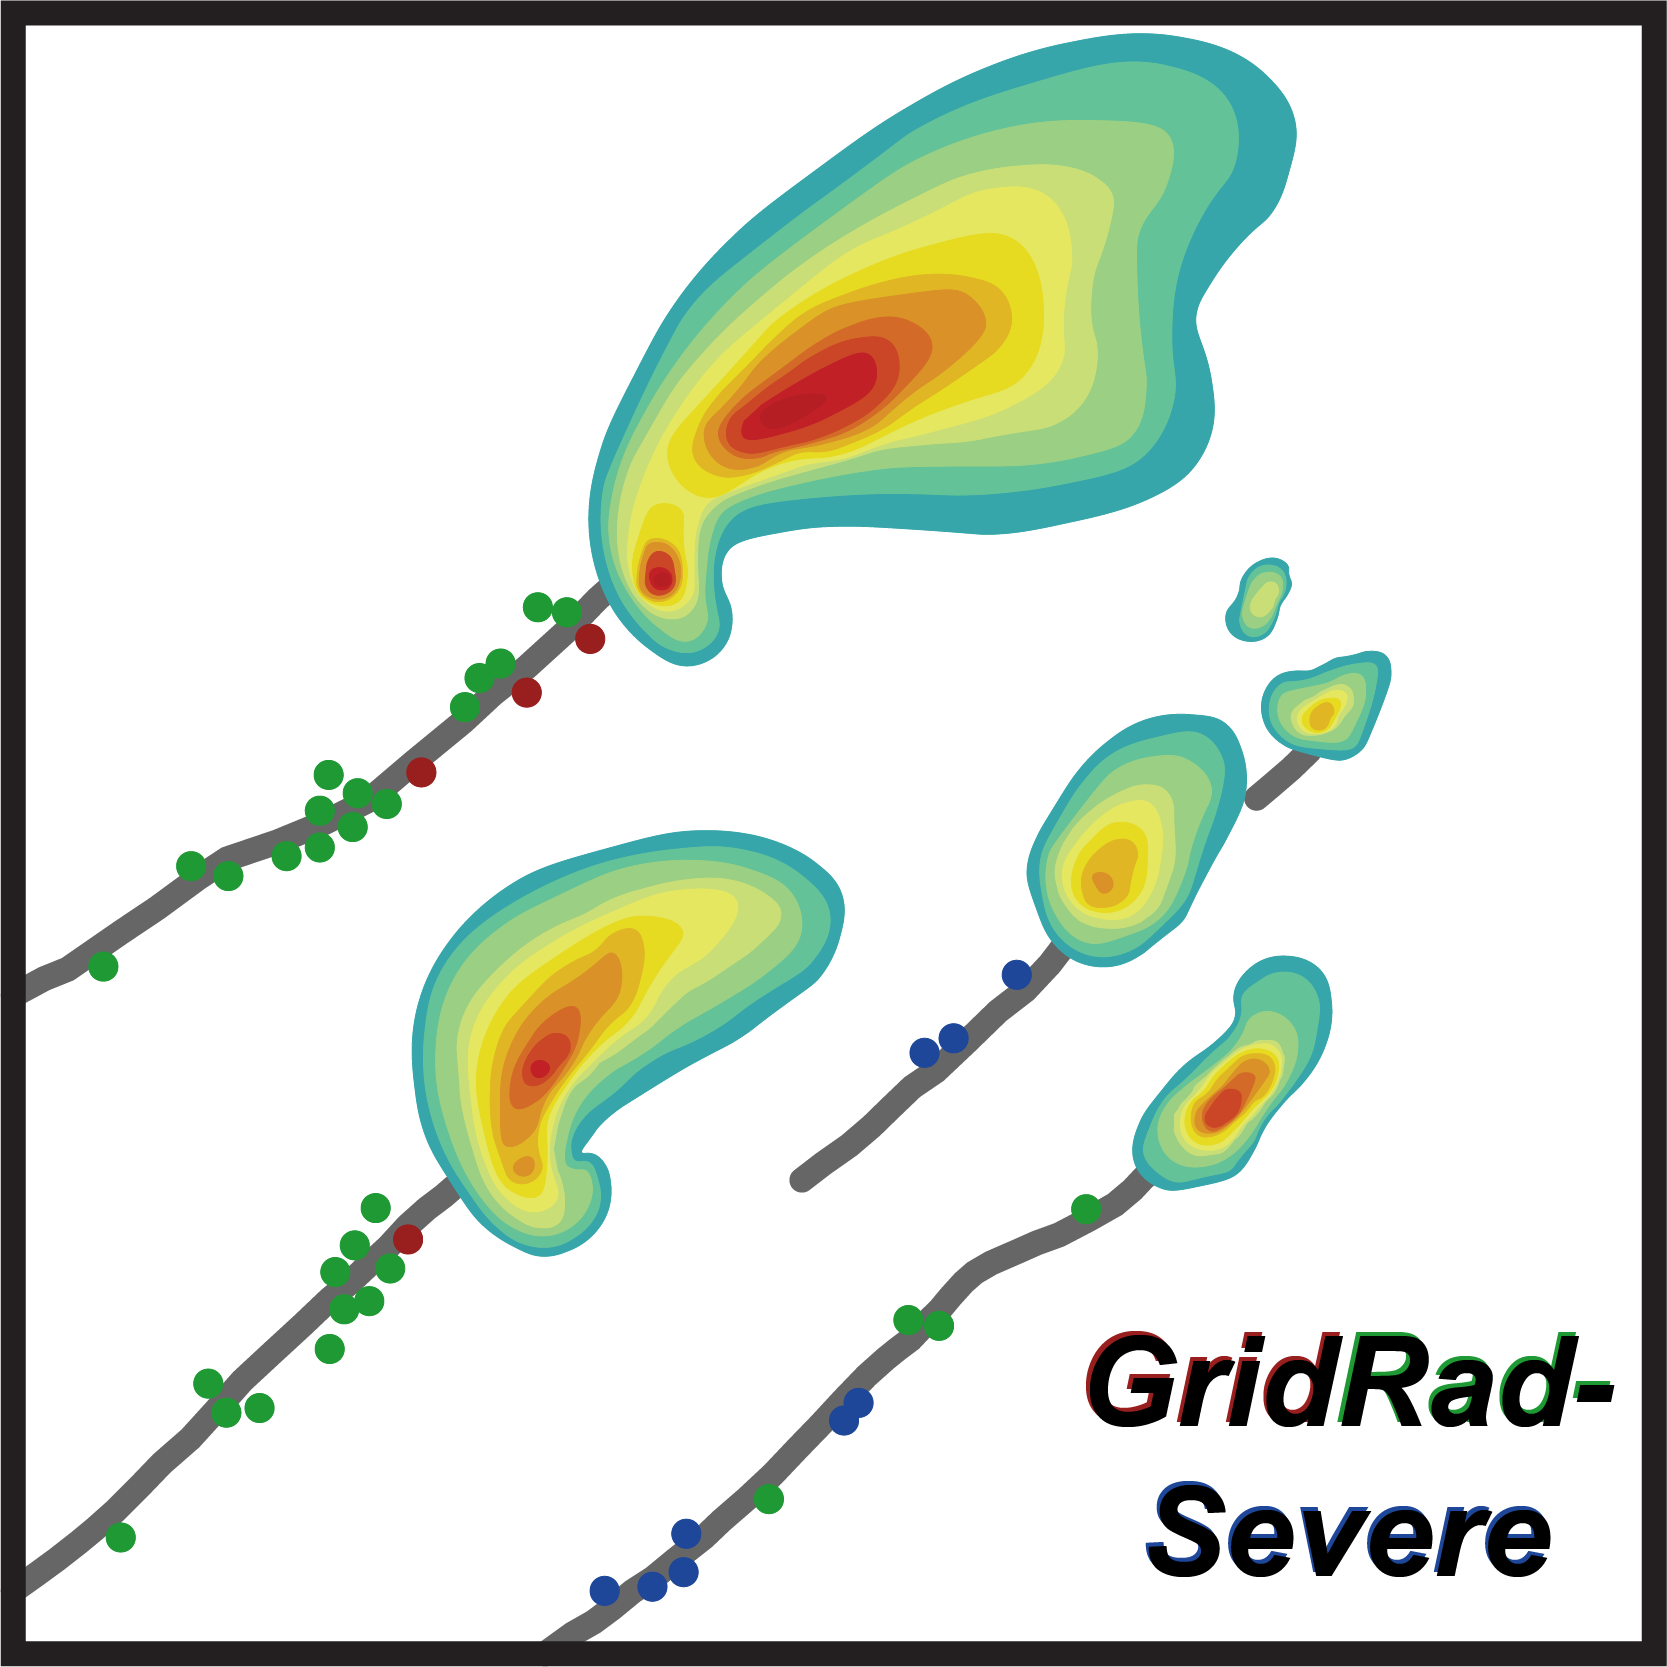 This image is the GridRad-Severe logo.  Clicking here will take you to the full resolution image.